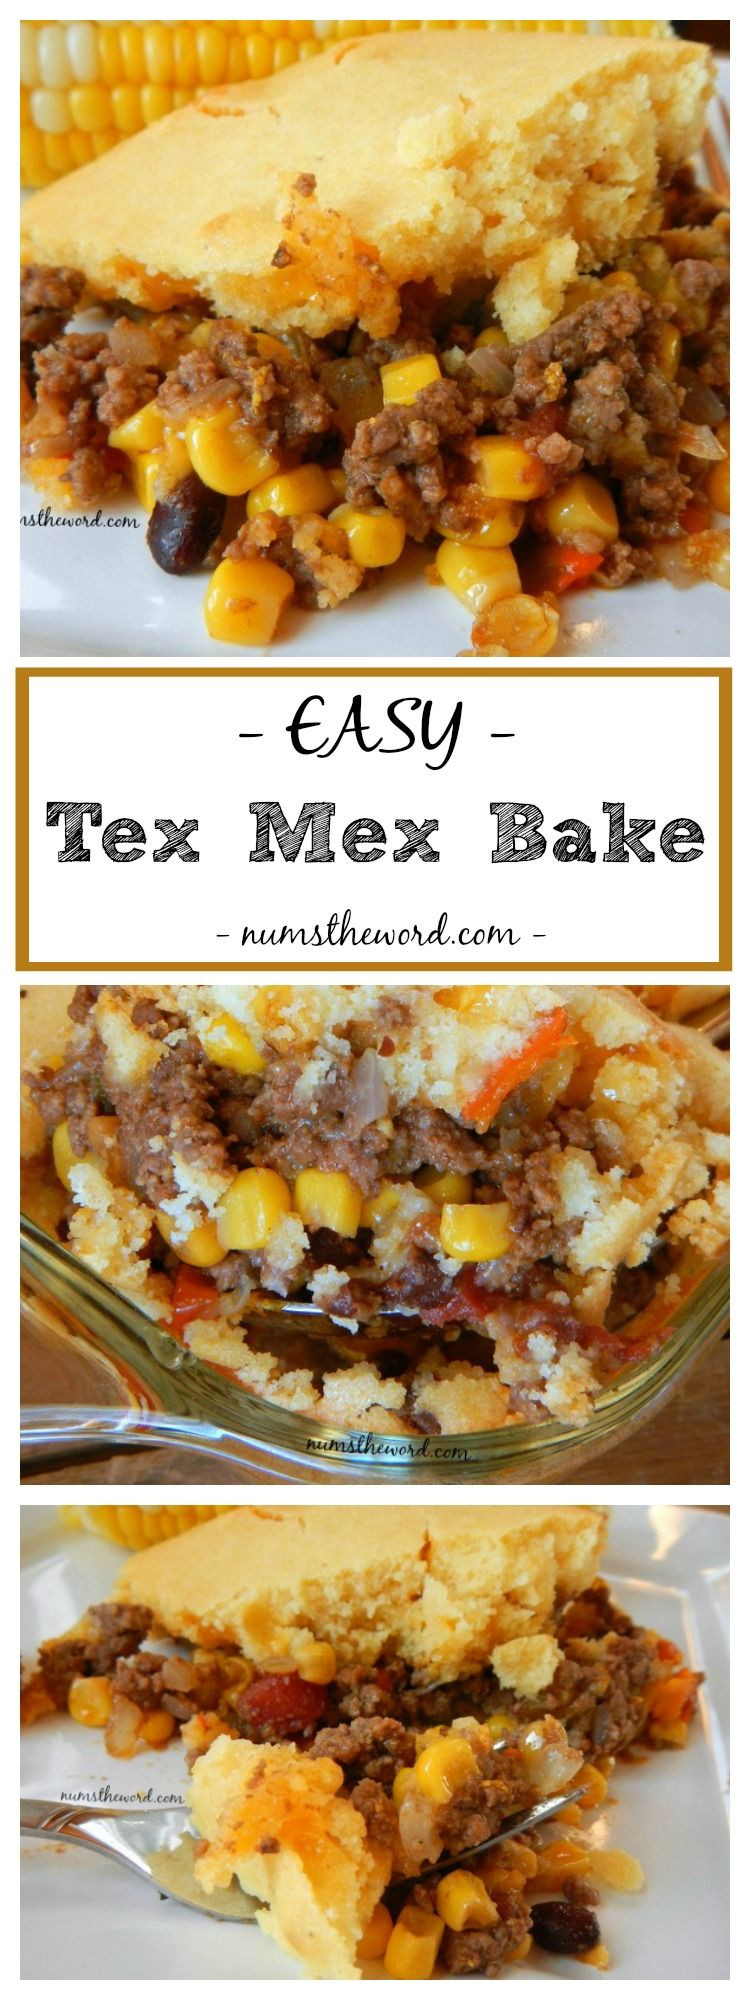 Ground Beef And Cornbread Recipes
 This Easy Tex Mex Bake has turned into a favorite meal